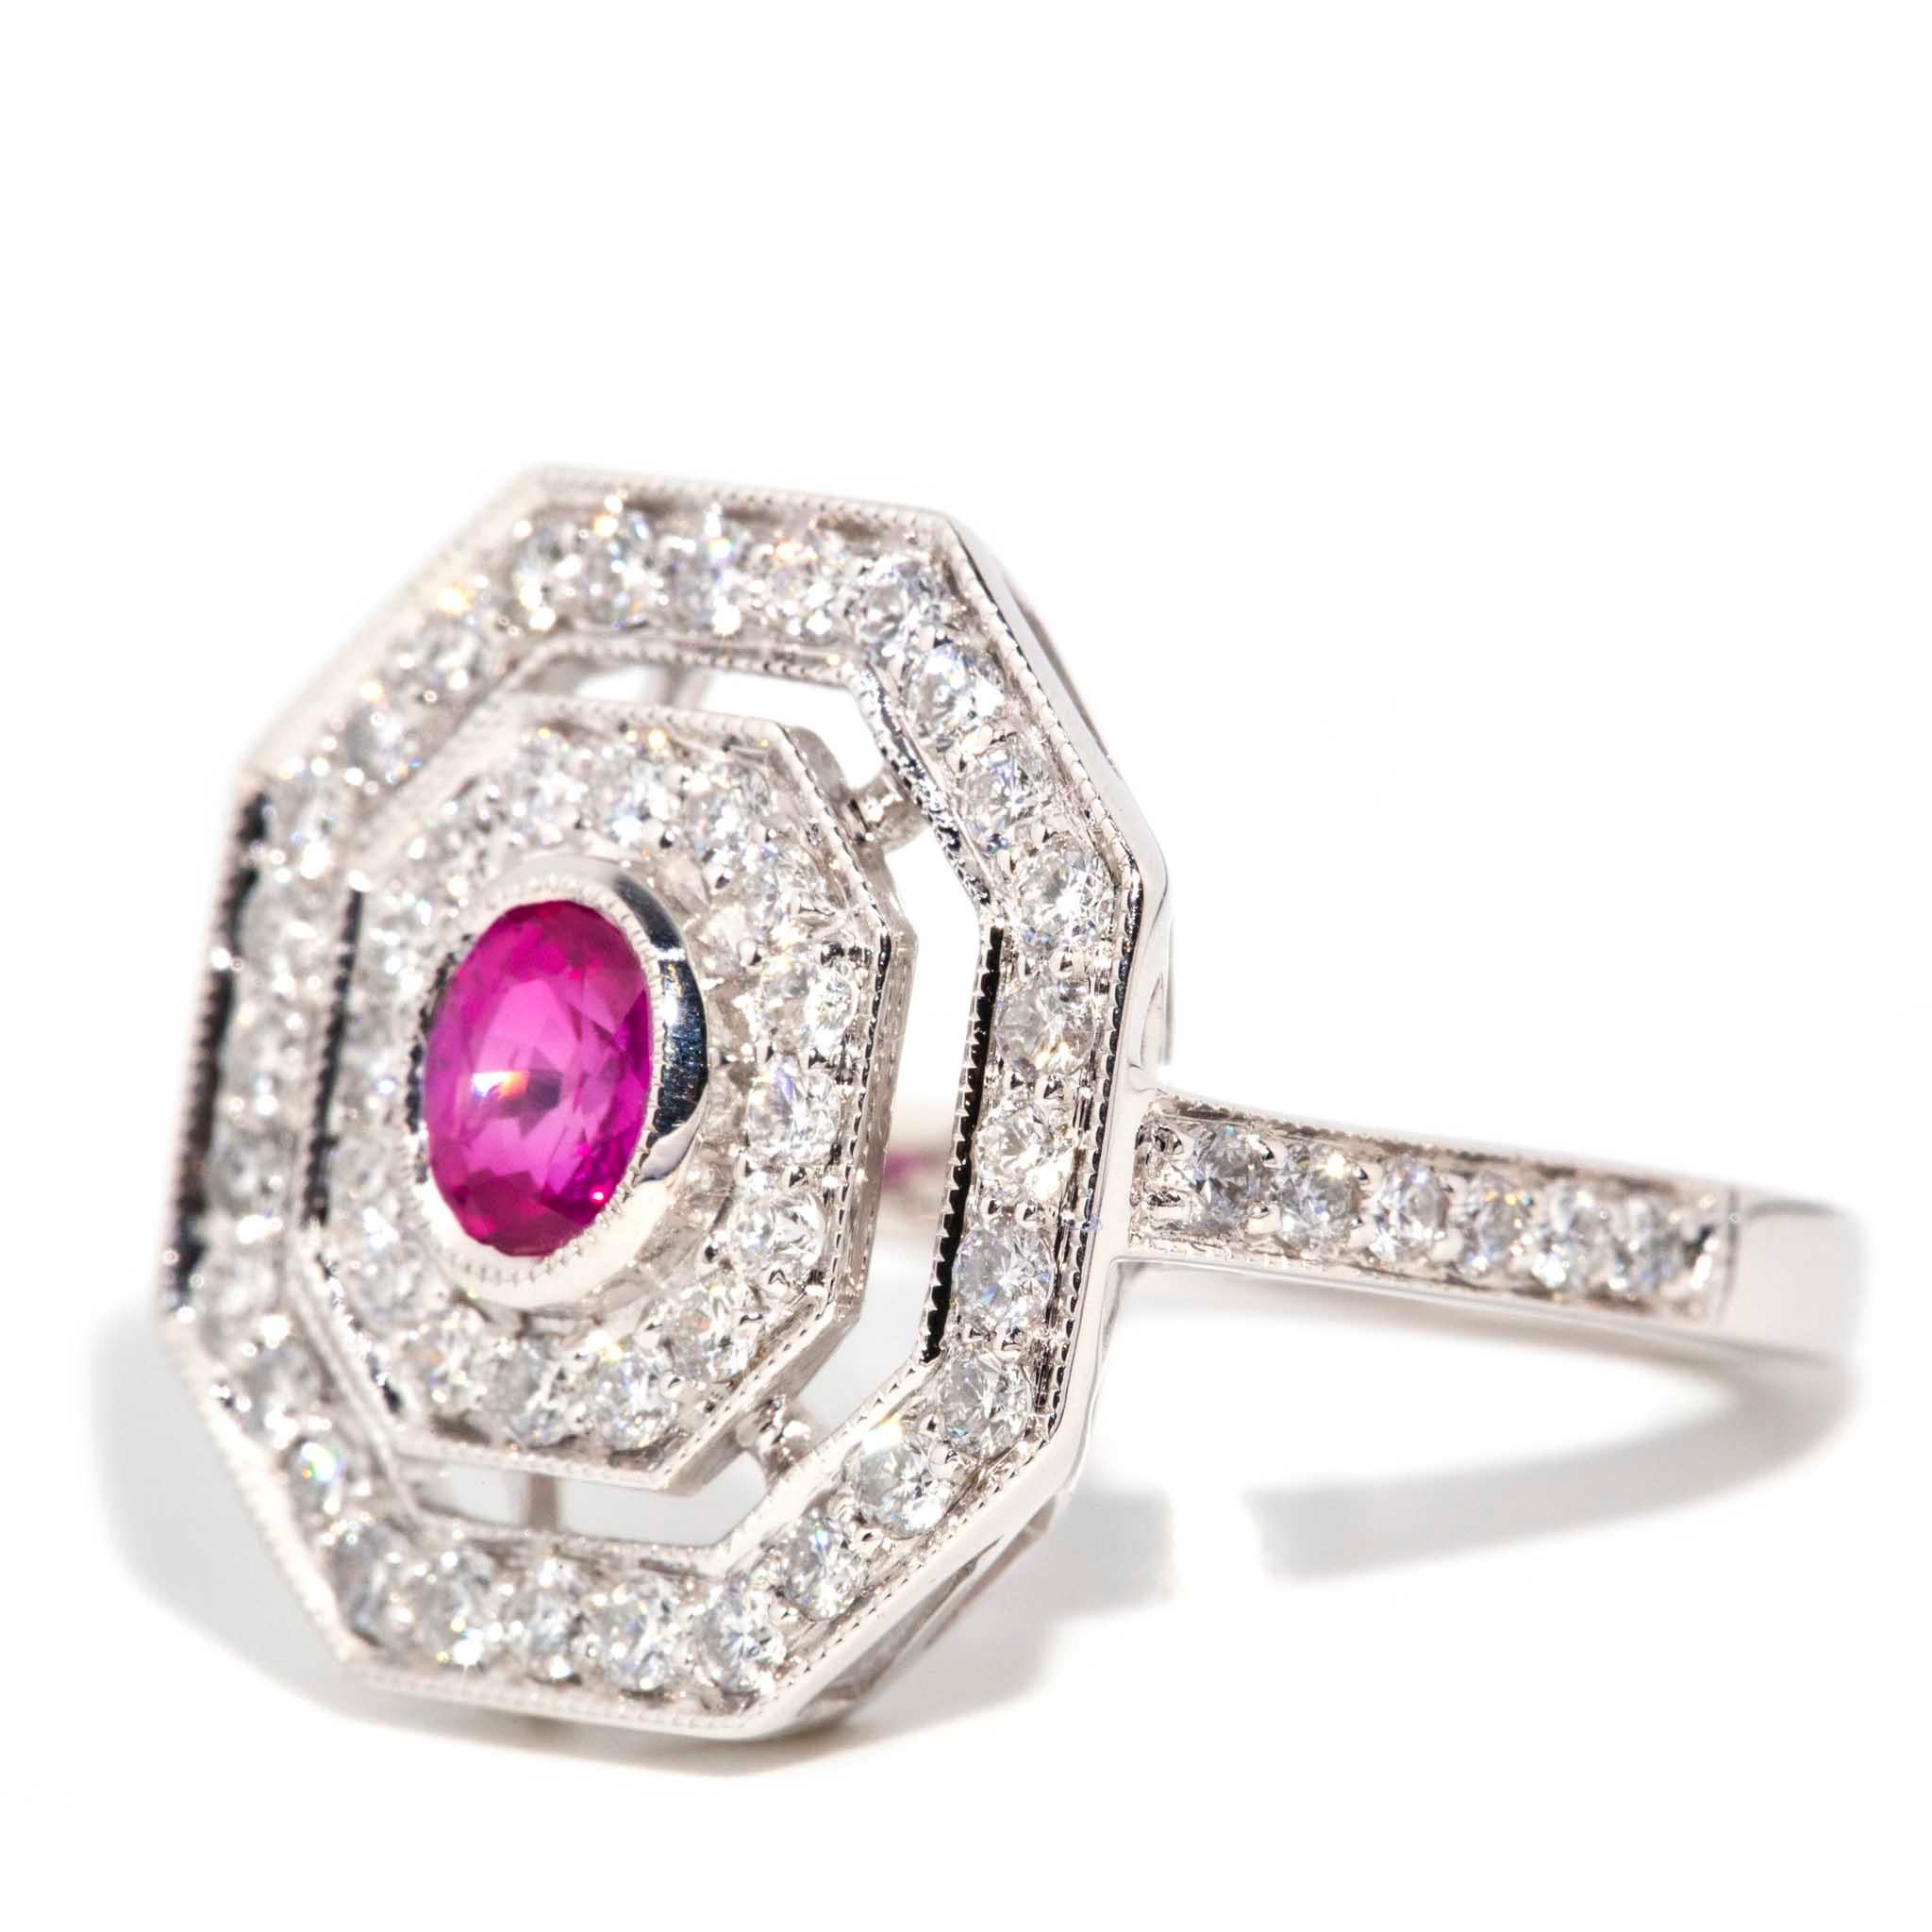 Natural Ruby & 1.07 Carat Diamond Art Deco Inspired Ring 18 Carat White Gold For Sale 5